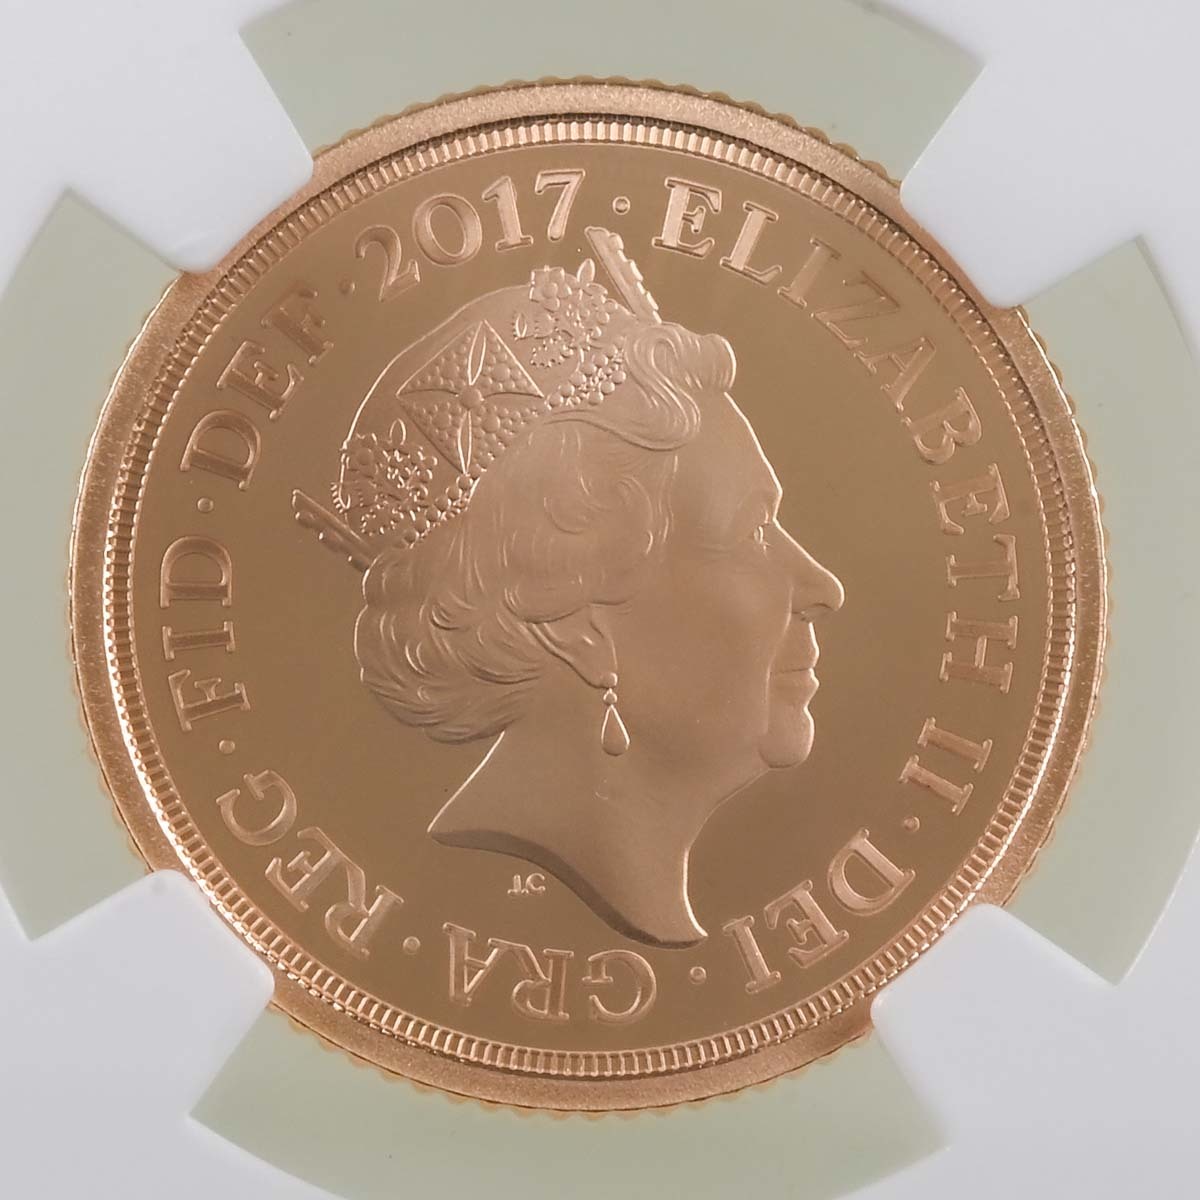 SVH17 2017 Elizabeth II Gold Proof Half Sovereign 200th Anniversary Coin NGC Graded PF 70 Ultra Cameo Obverse